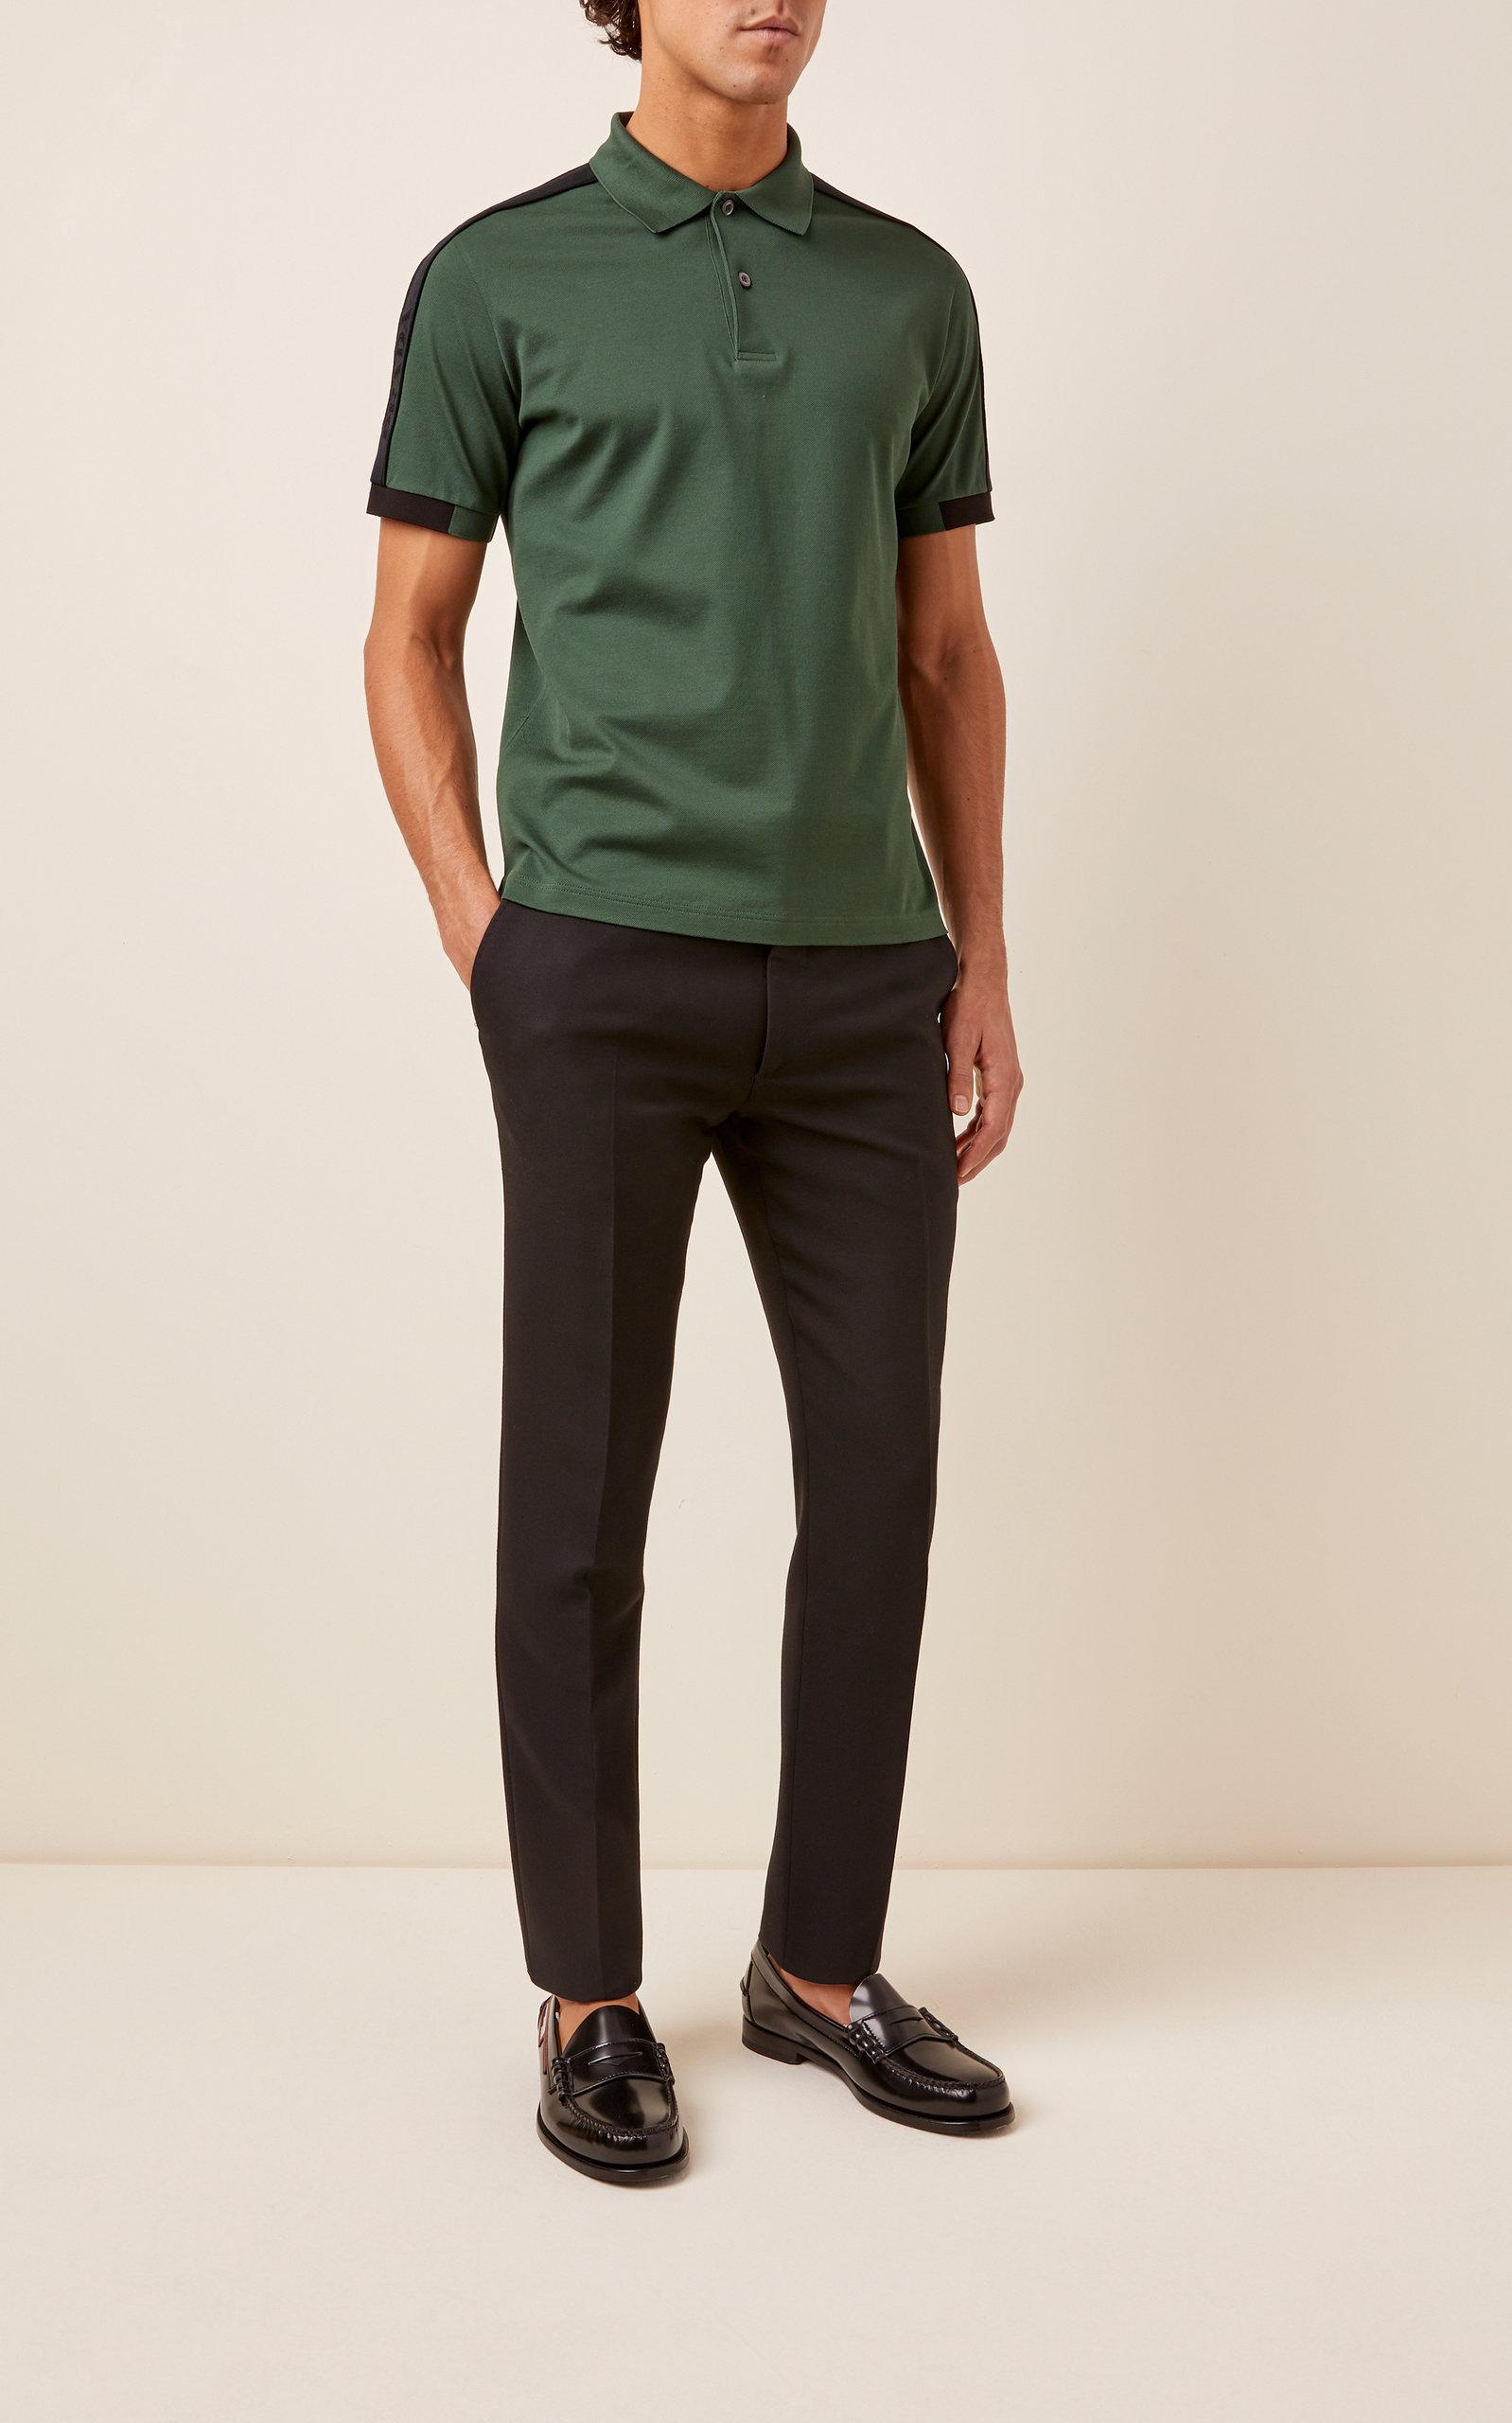 Prada Synthetic Tricot-trimmed Piqué Polo Shirt in Green for Men - Lyst